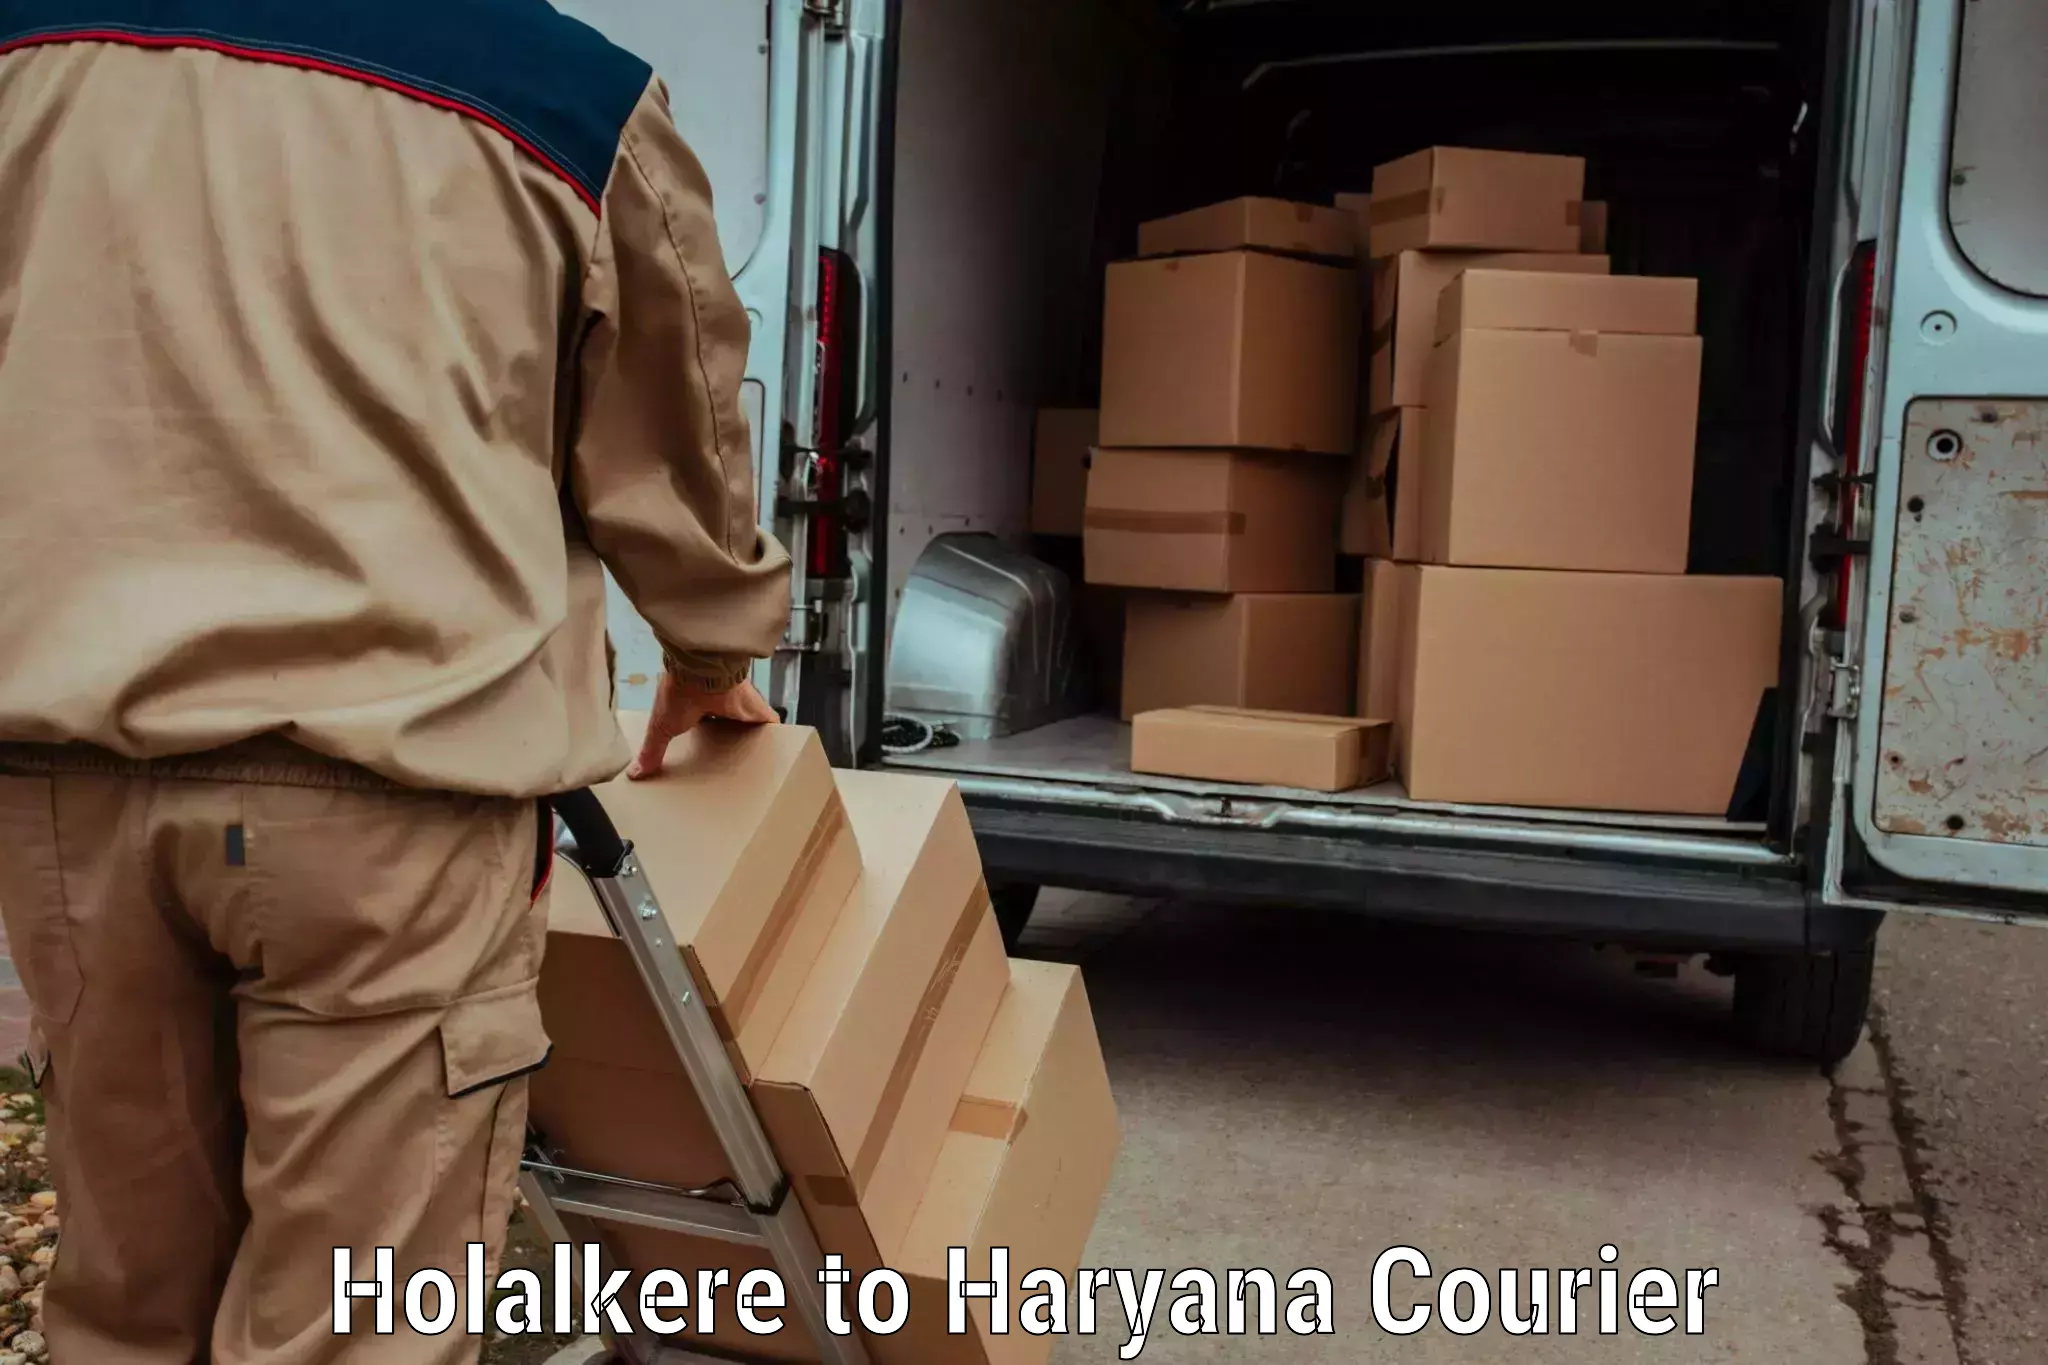 Luggage transport consultancy Holalkere to Haryana